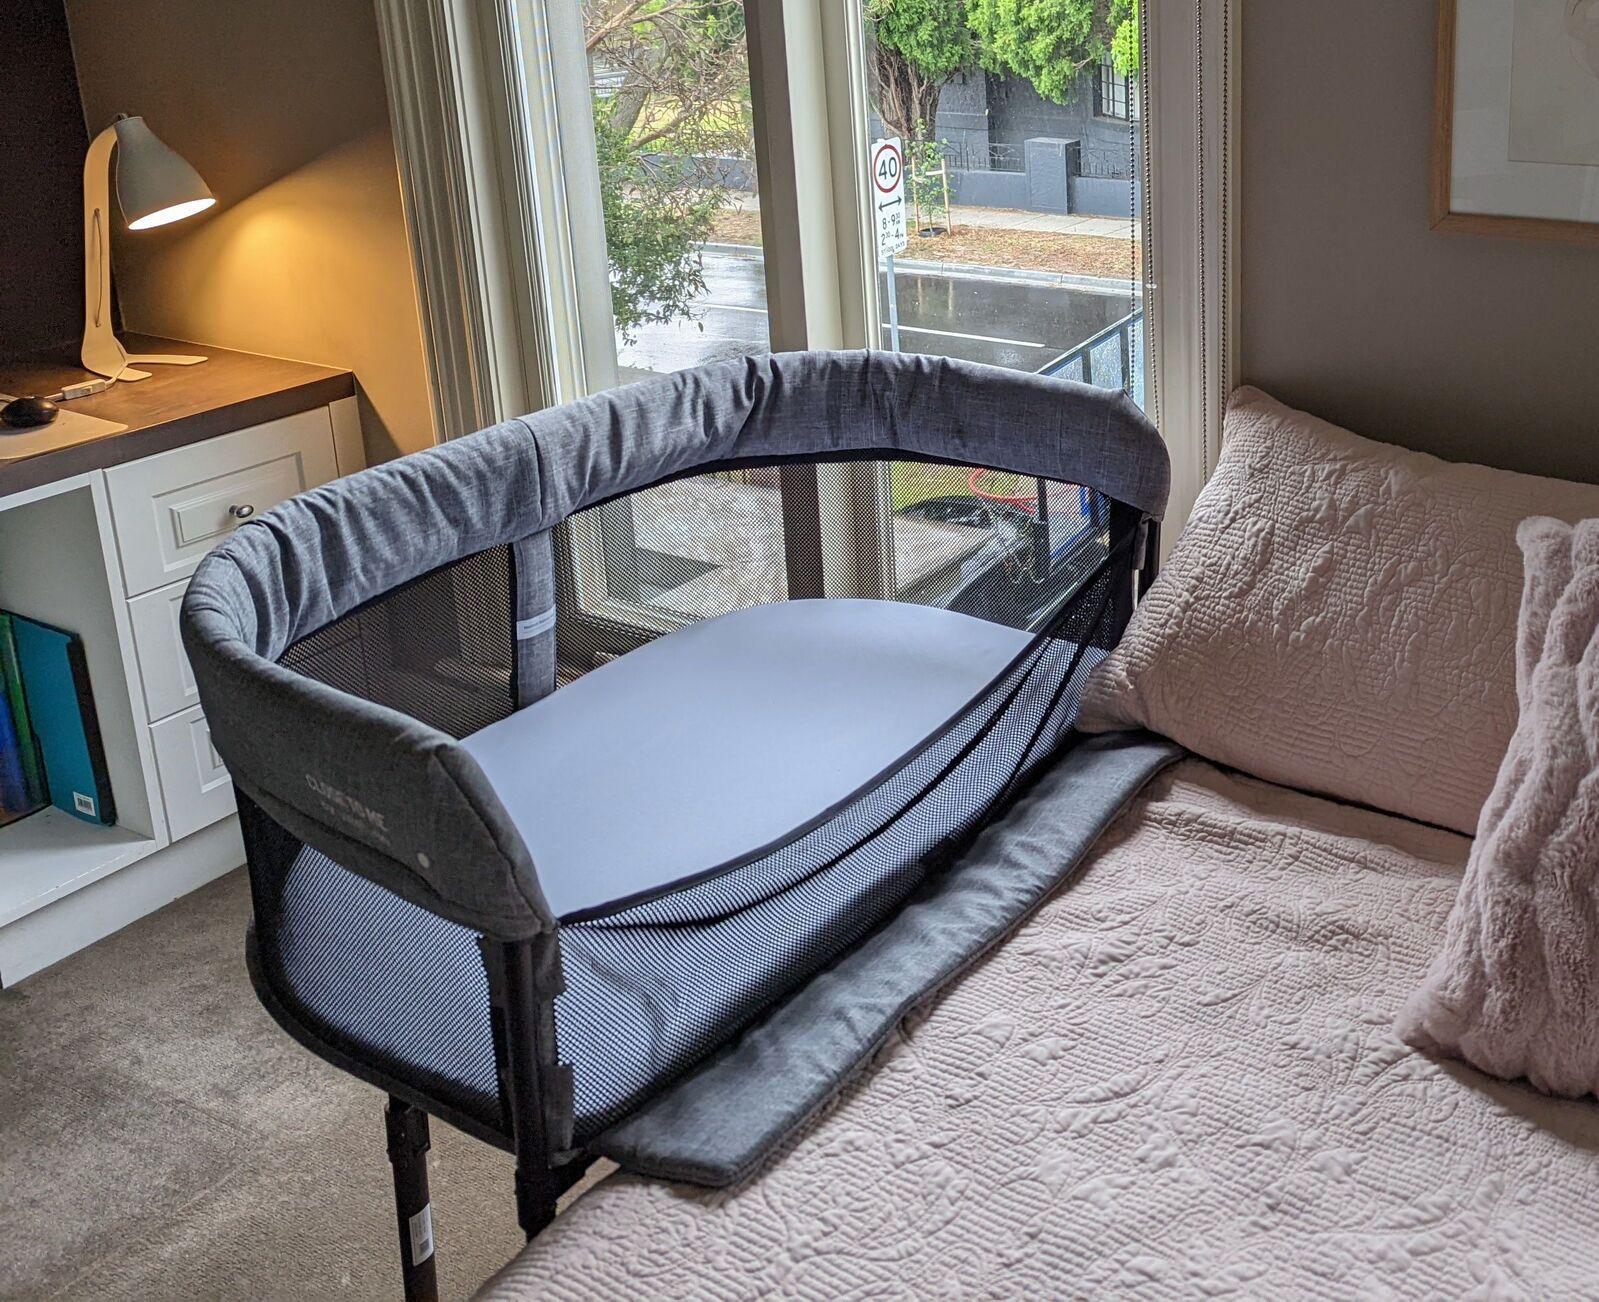 Close To Me Co-Sleeper: Luxury Bed Add-on for Your Baby to sleep in!